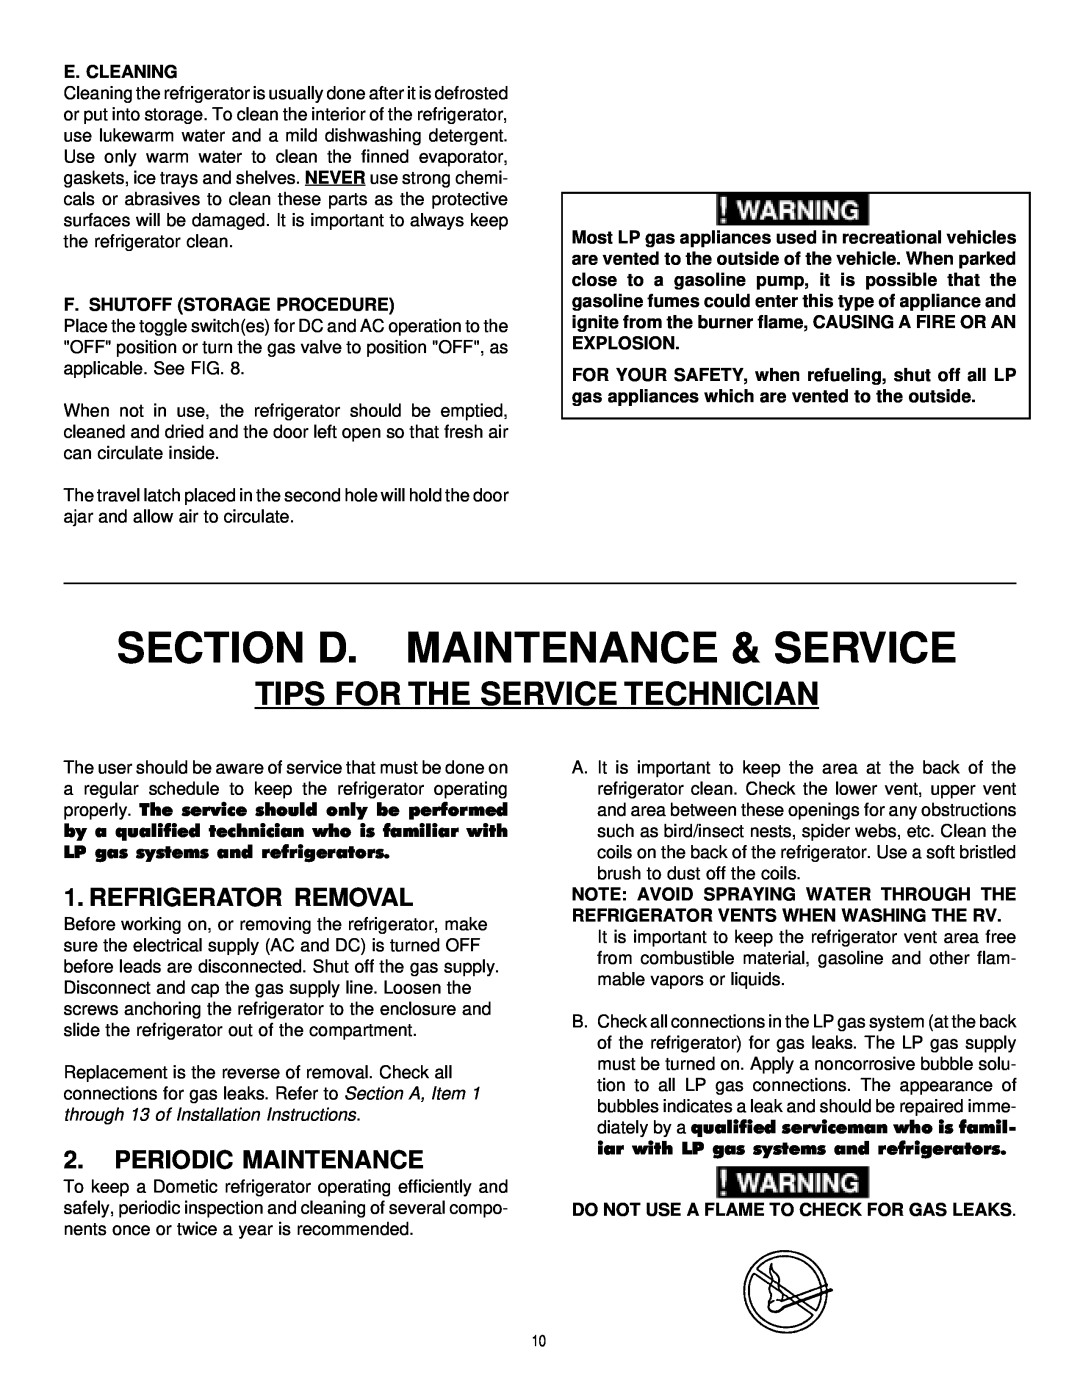 Dometic RM2193 manual Section D. Maintenance & Service, Tips For The Service Technician, Refrigerator Removal, E. Cleaning 